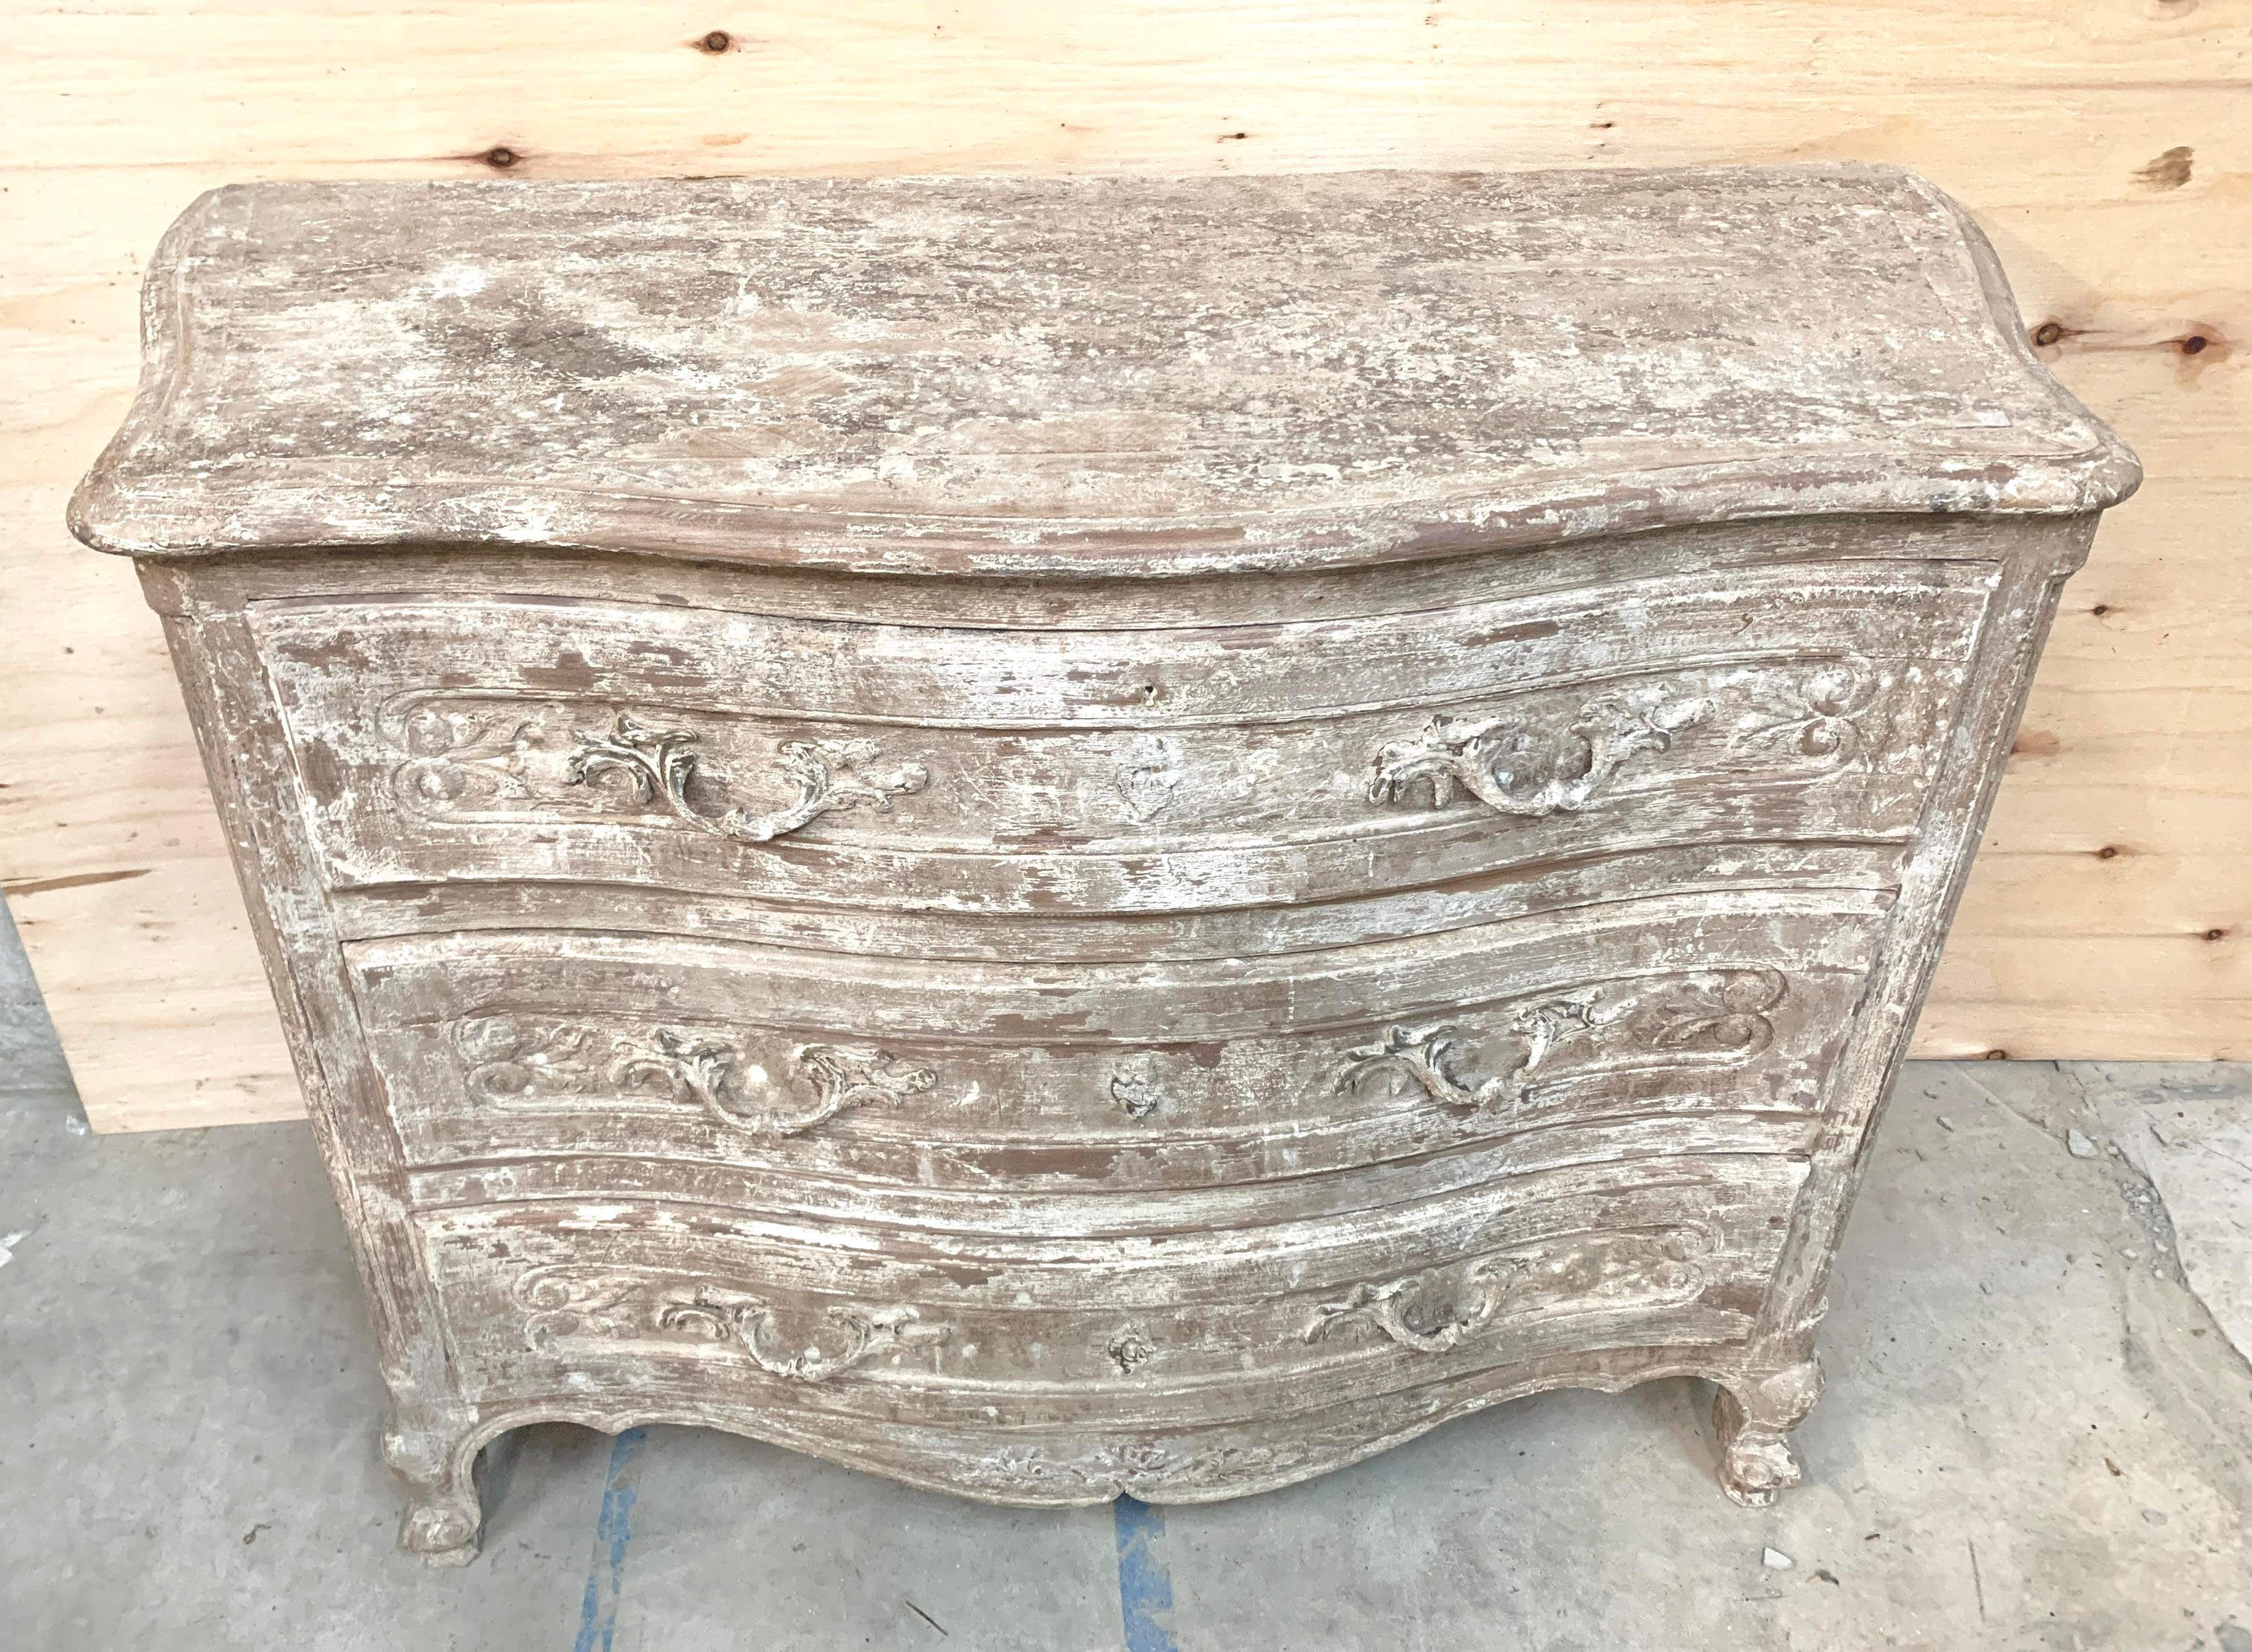 This chest features a serpentine front, cabriole legs and scroll feet. The Vintaged white finish is rubbed through and distressed to allow the natural beauty of the wood beneath to shine through. 

Acquired on a buying trip to France in 2019. 